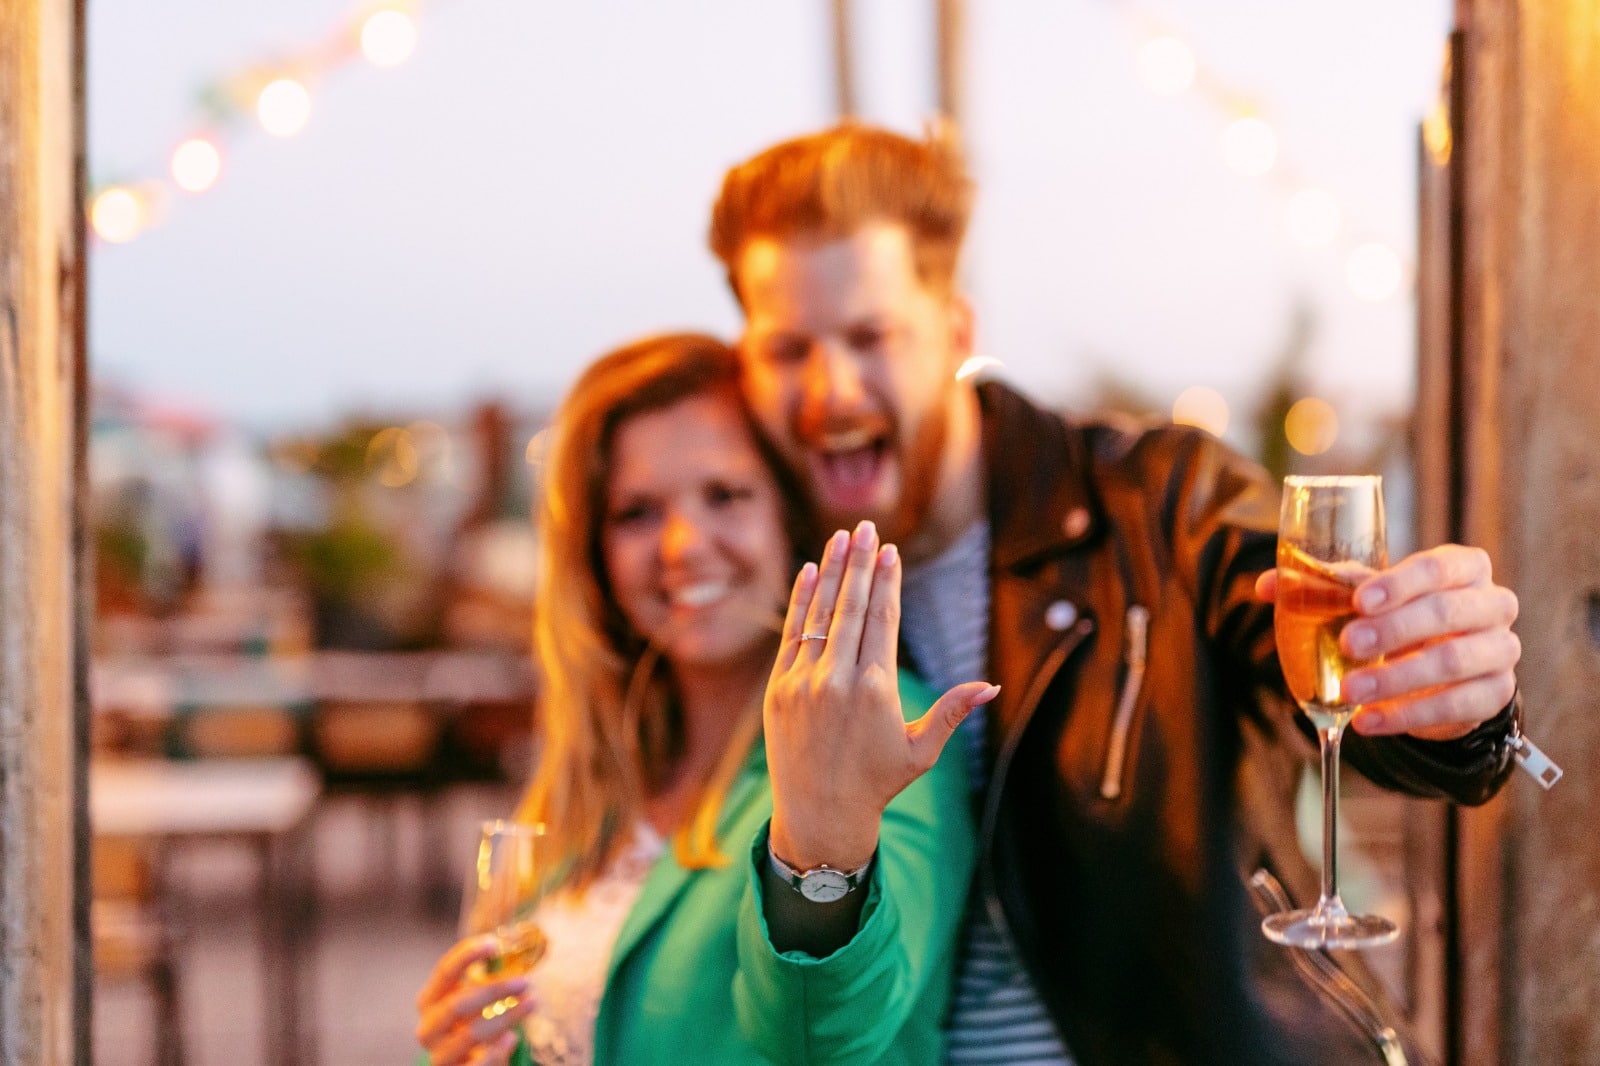 A man and woman hold champagne glasses at an outdoor wedding where they have just become engaged.